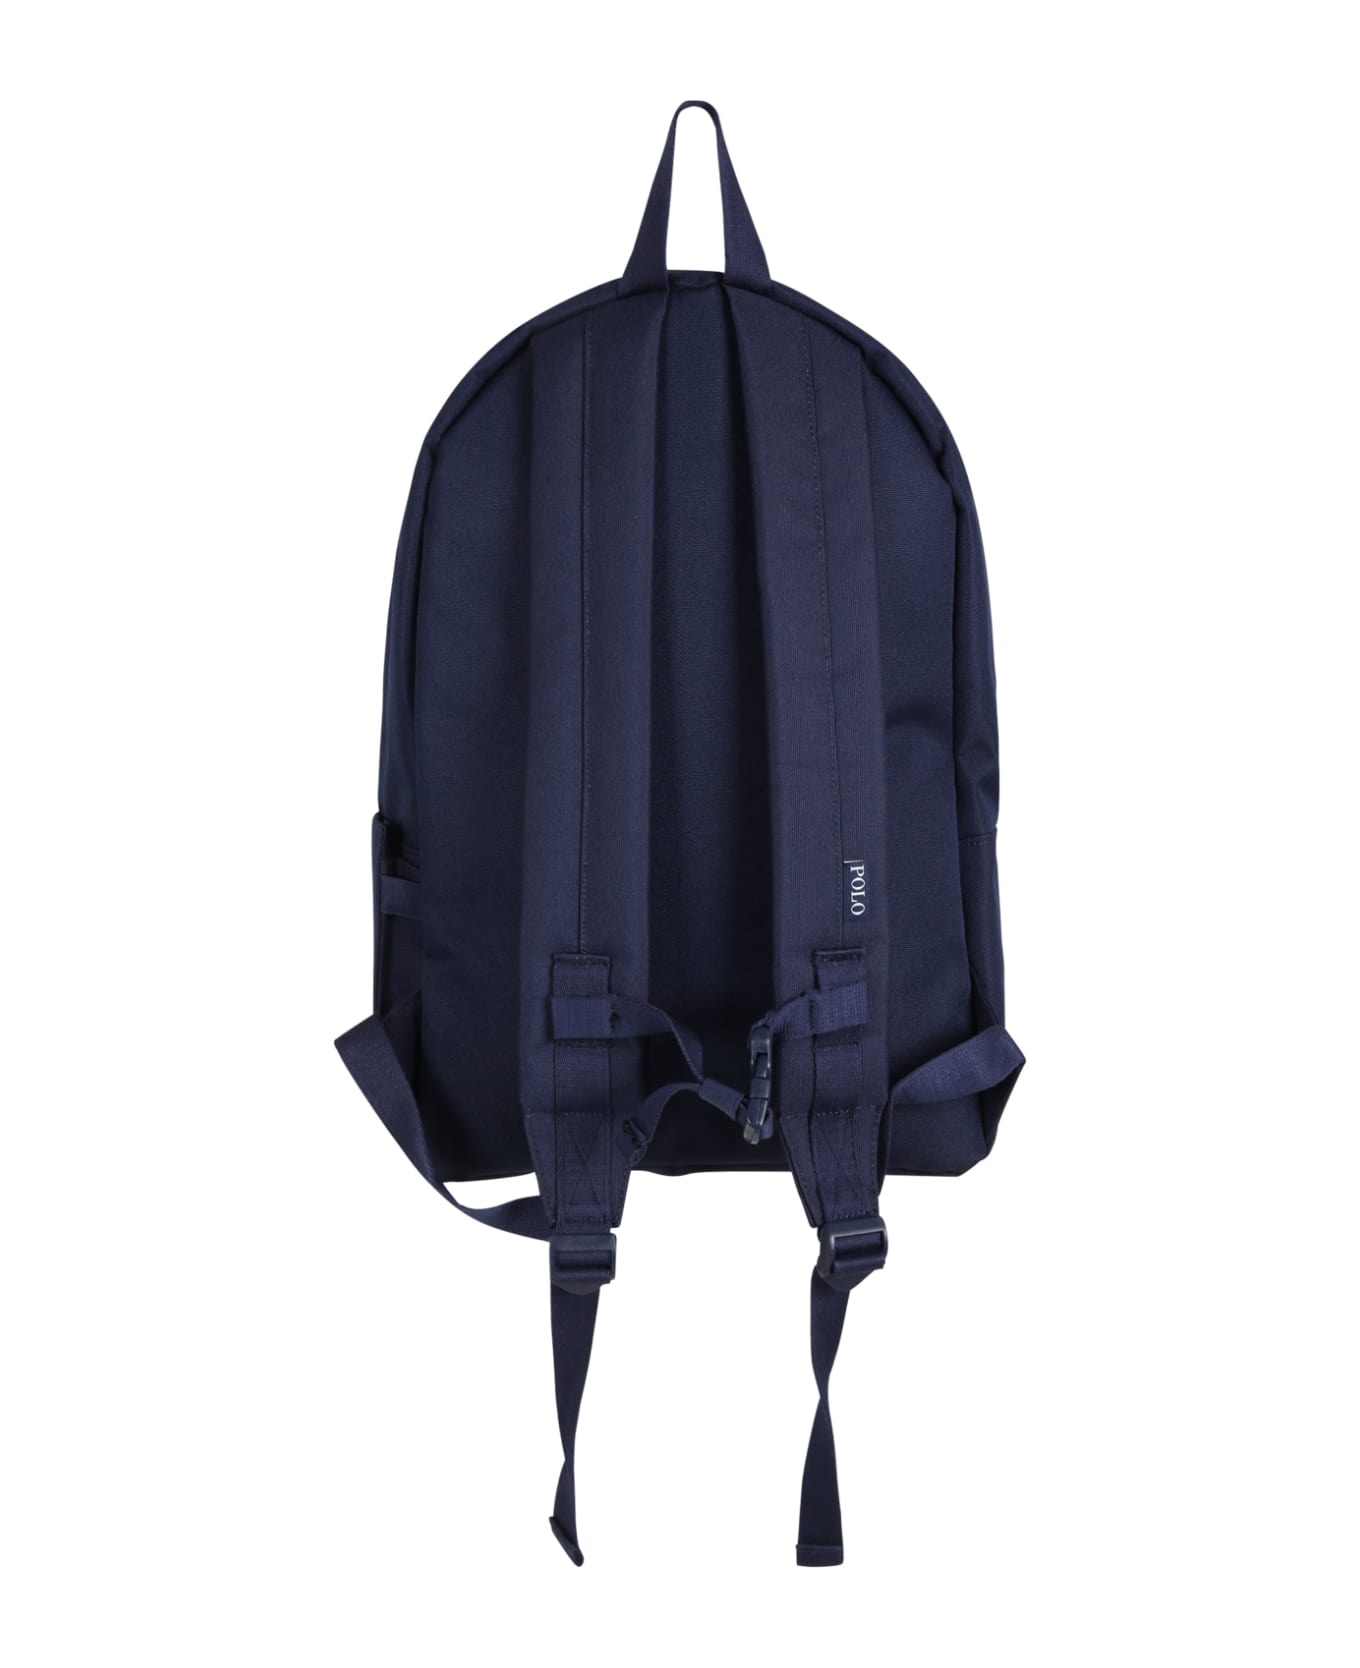 Ralph Lauren Blue Backpack For Boy With Iconic Pony Logo - Blue アクセサリー＆ギフト